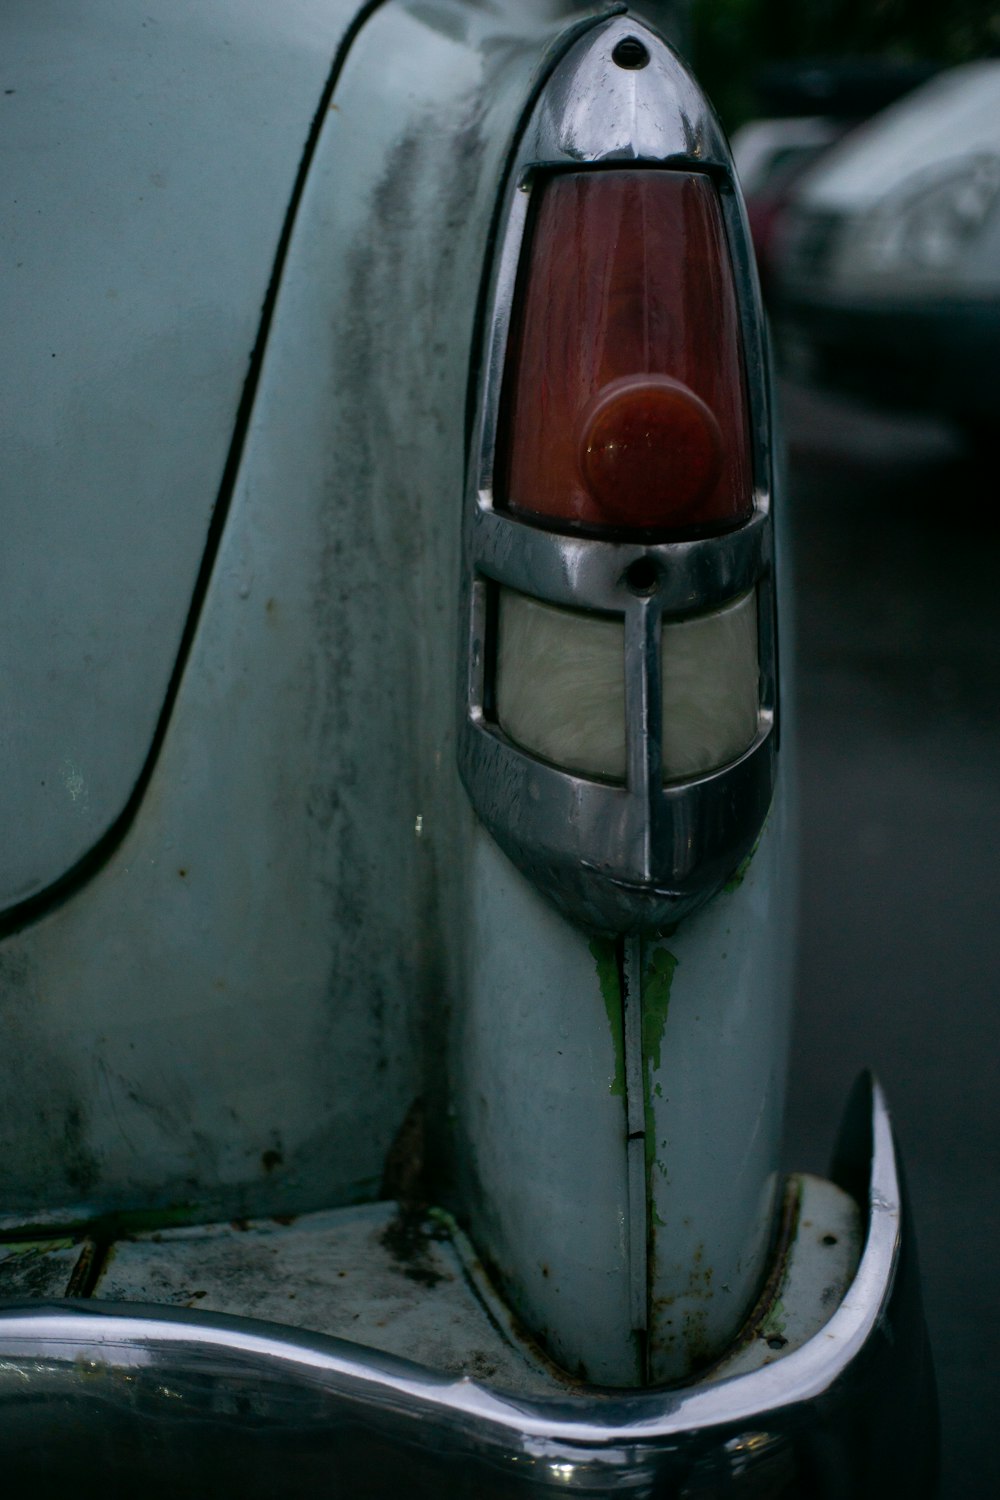 a close up of the tail light of an old car